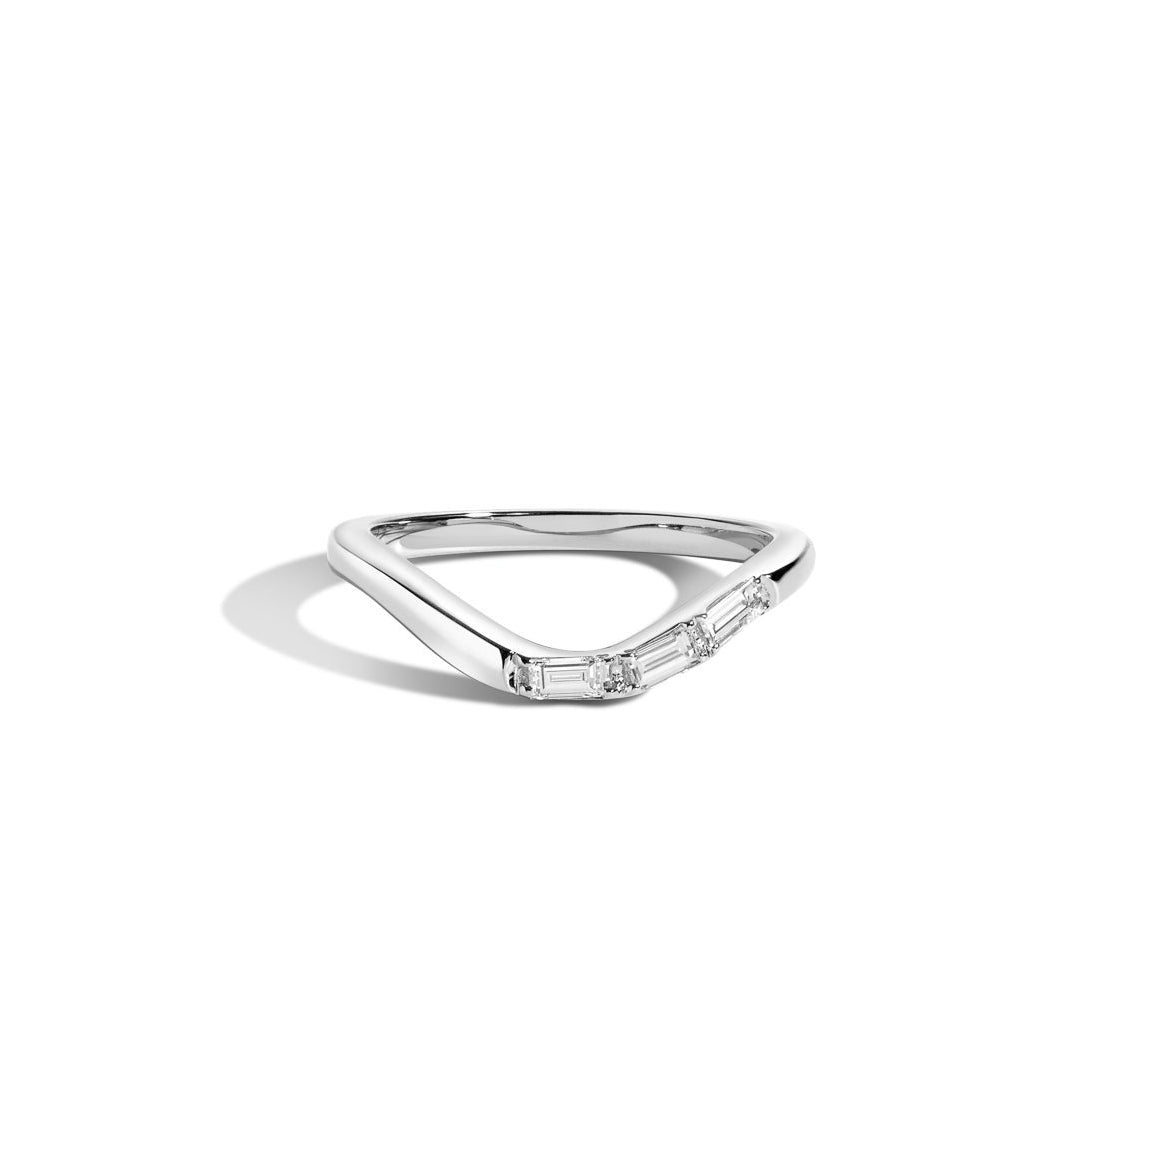 Shahla Karimi Jewelry Curved Asymmetrical Baguette Band in 14K/18K White Gold/Platinum and White Diamonds